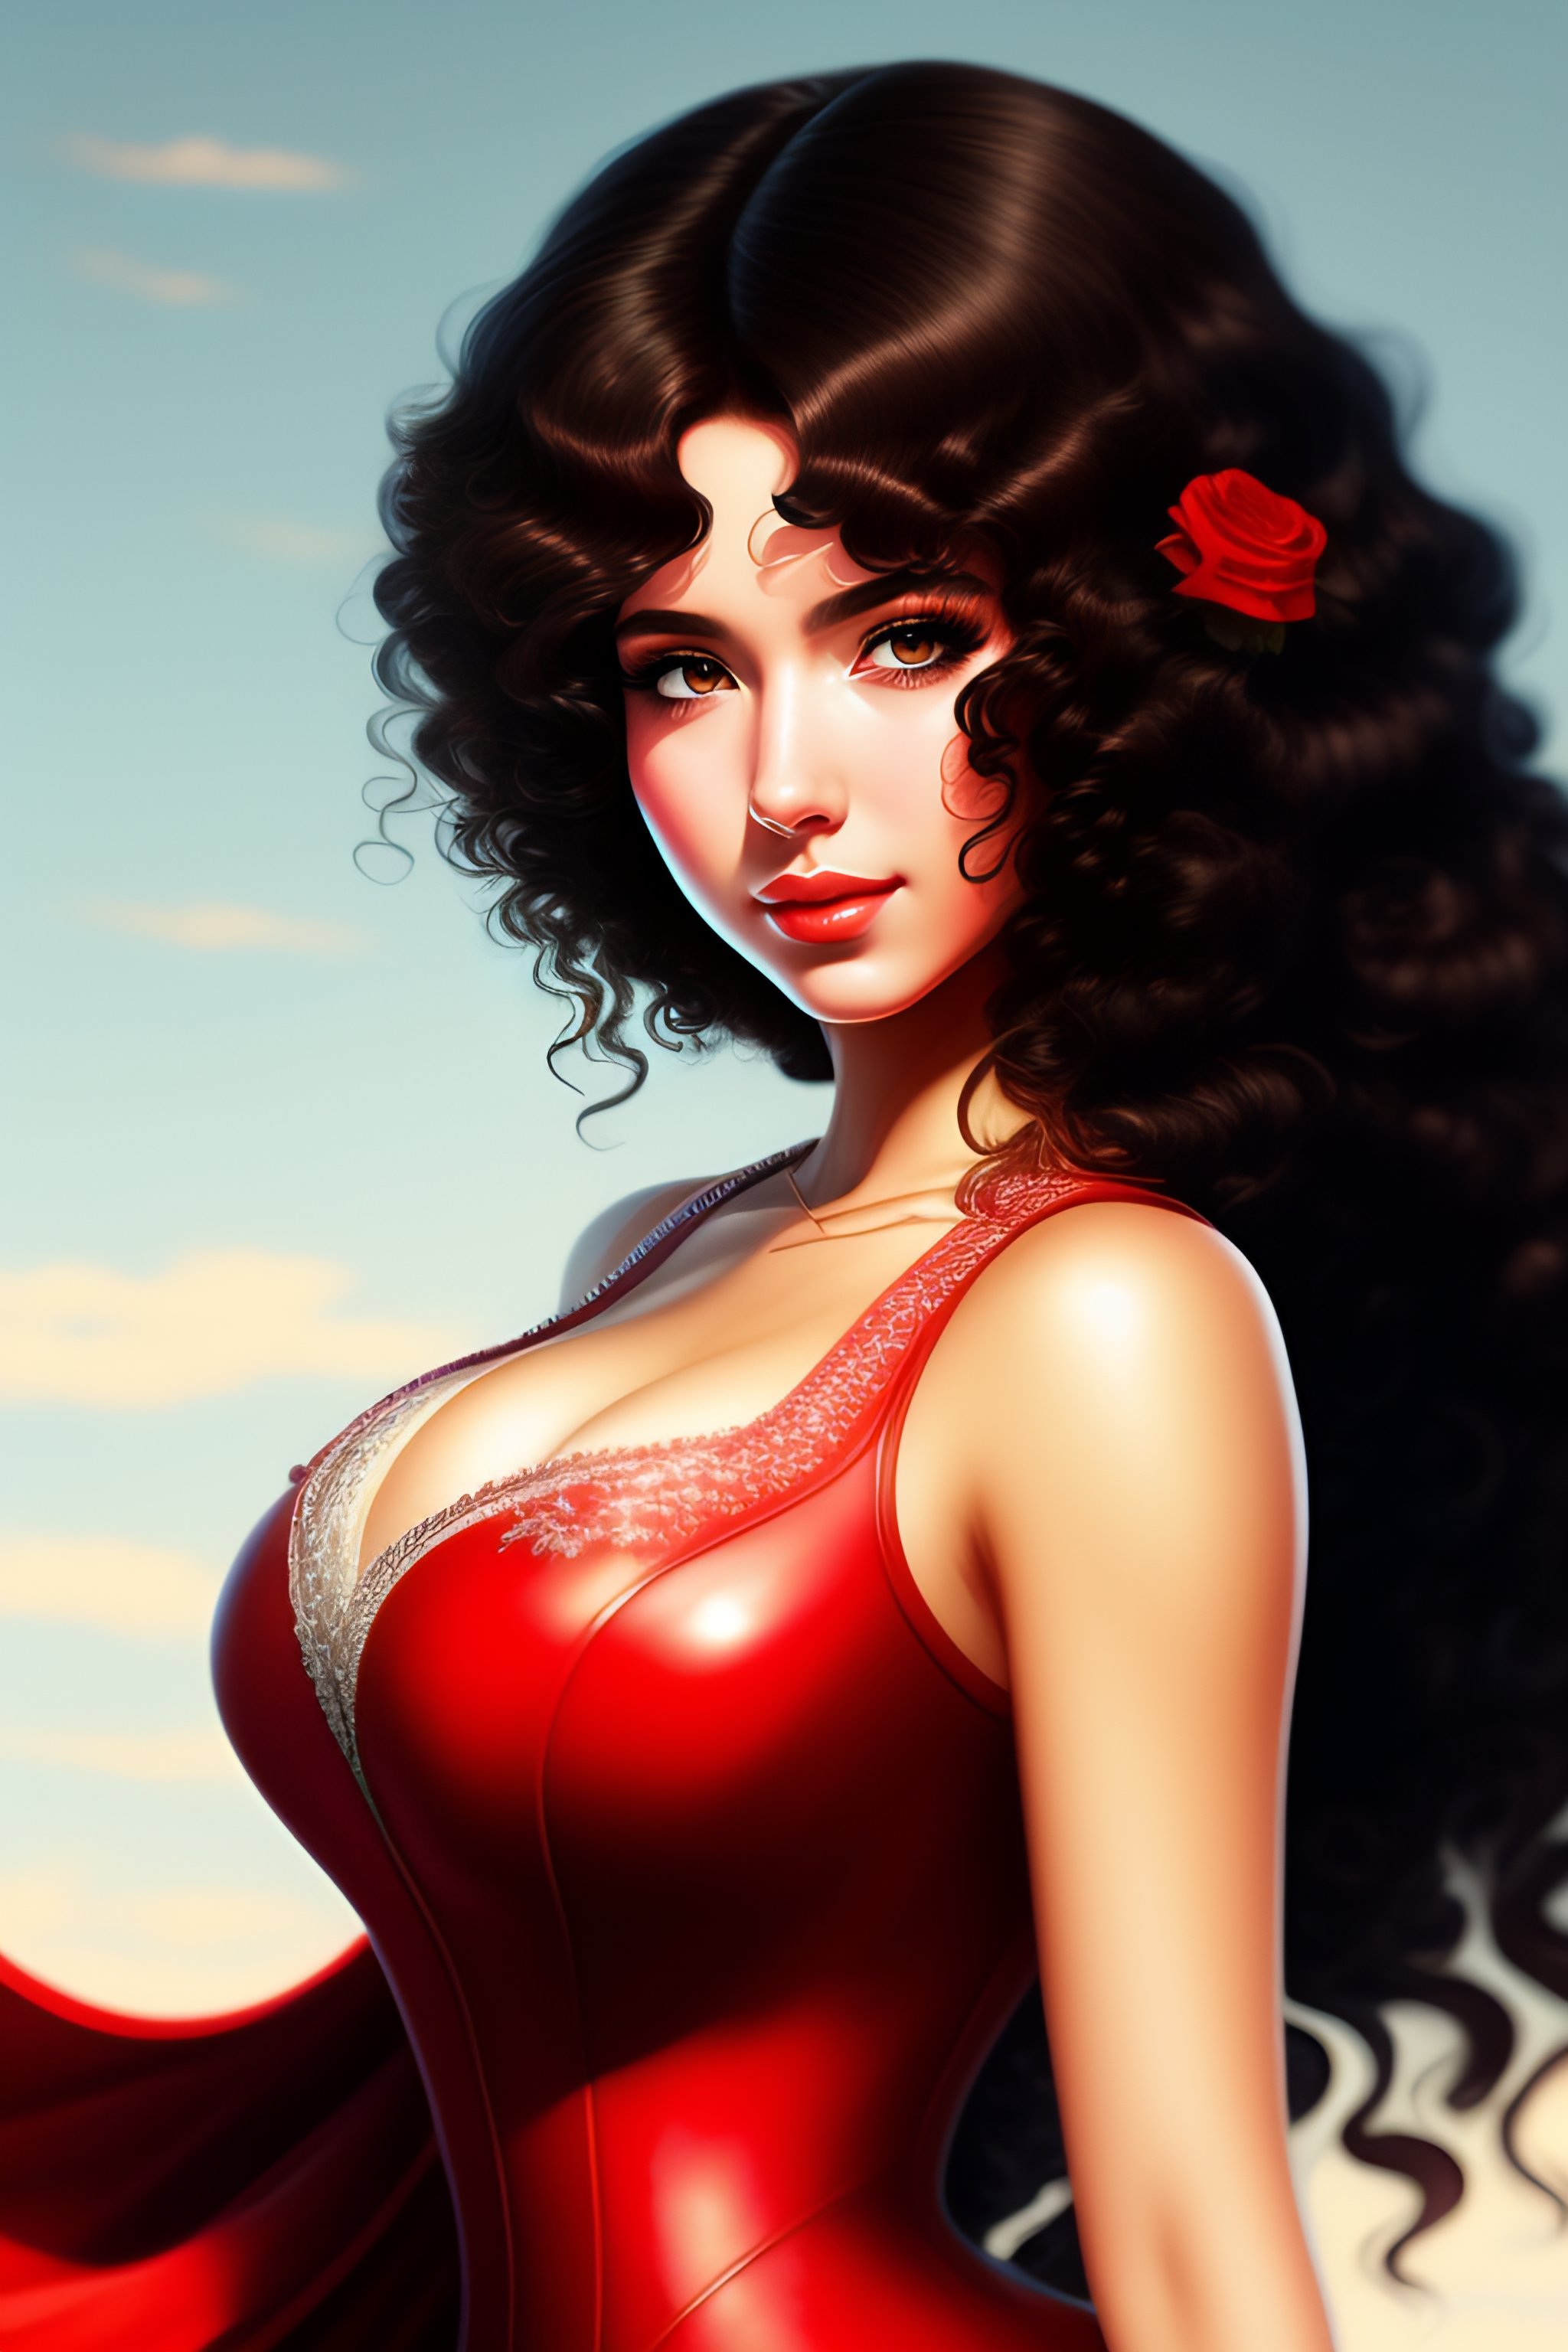 Lexica - Anime portrait of white girl with black curly hair, anime  masterpiece, highly detailed